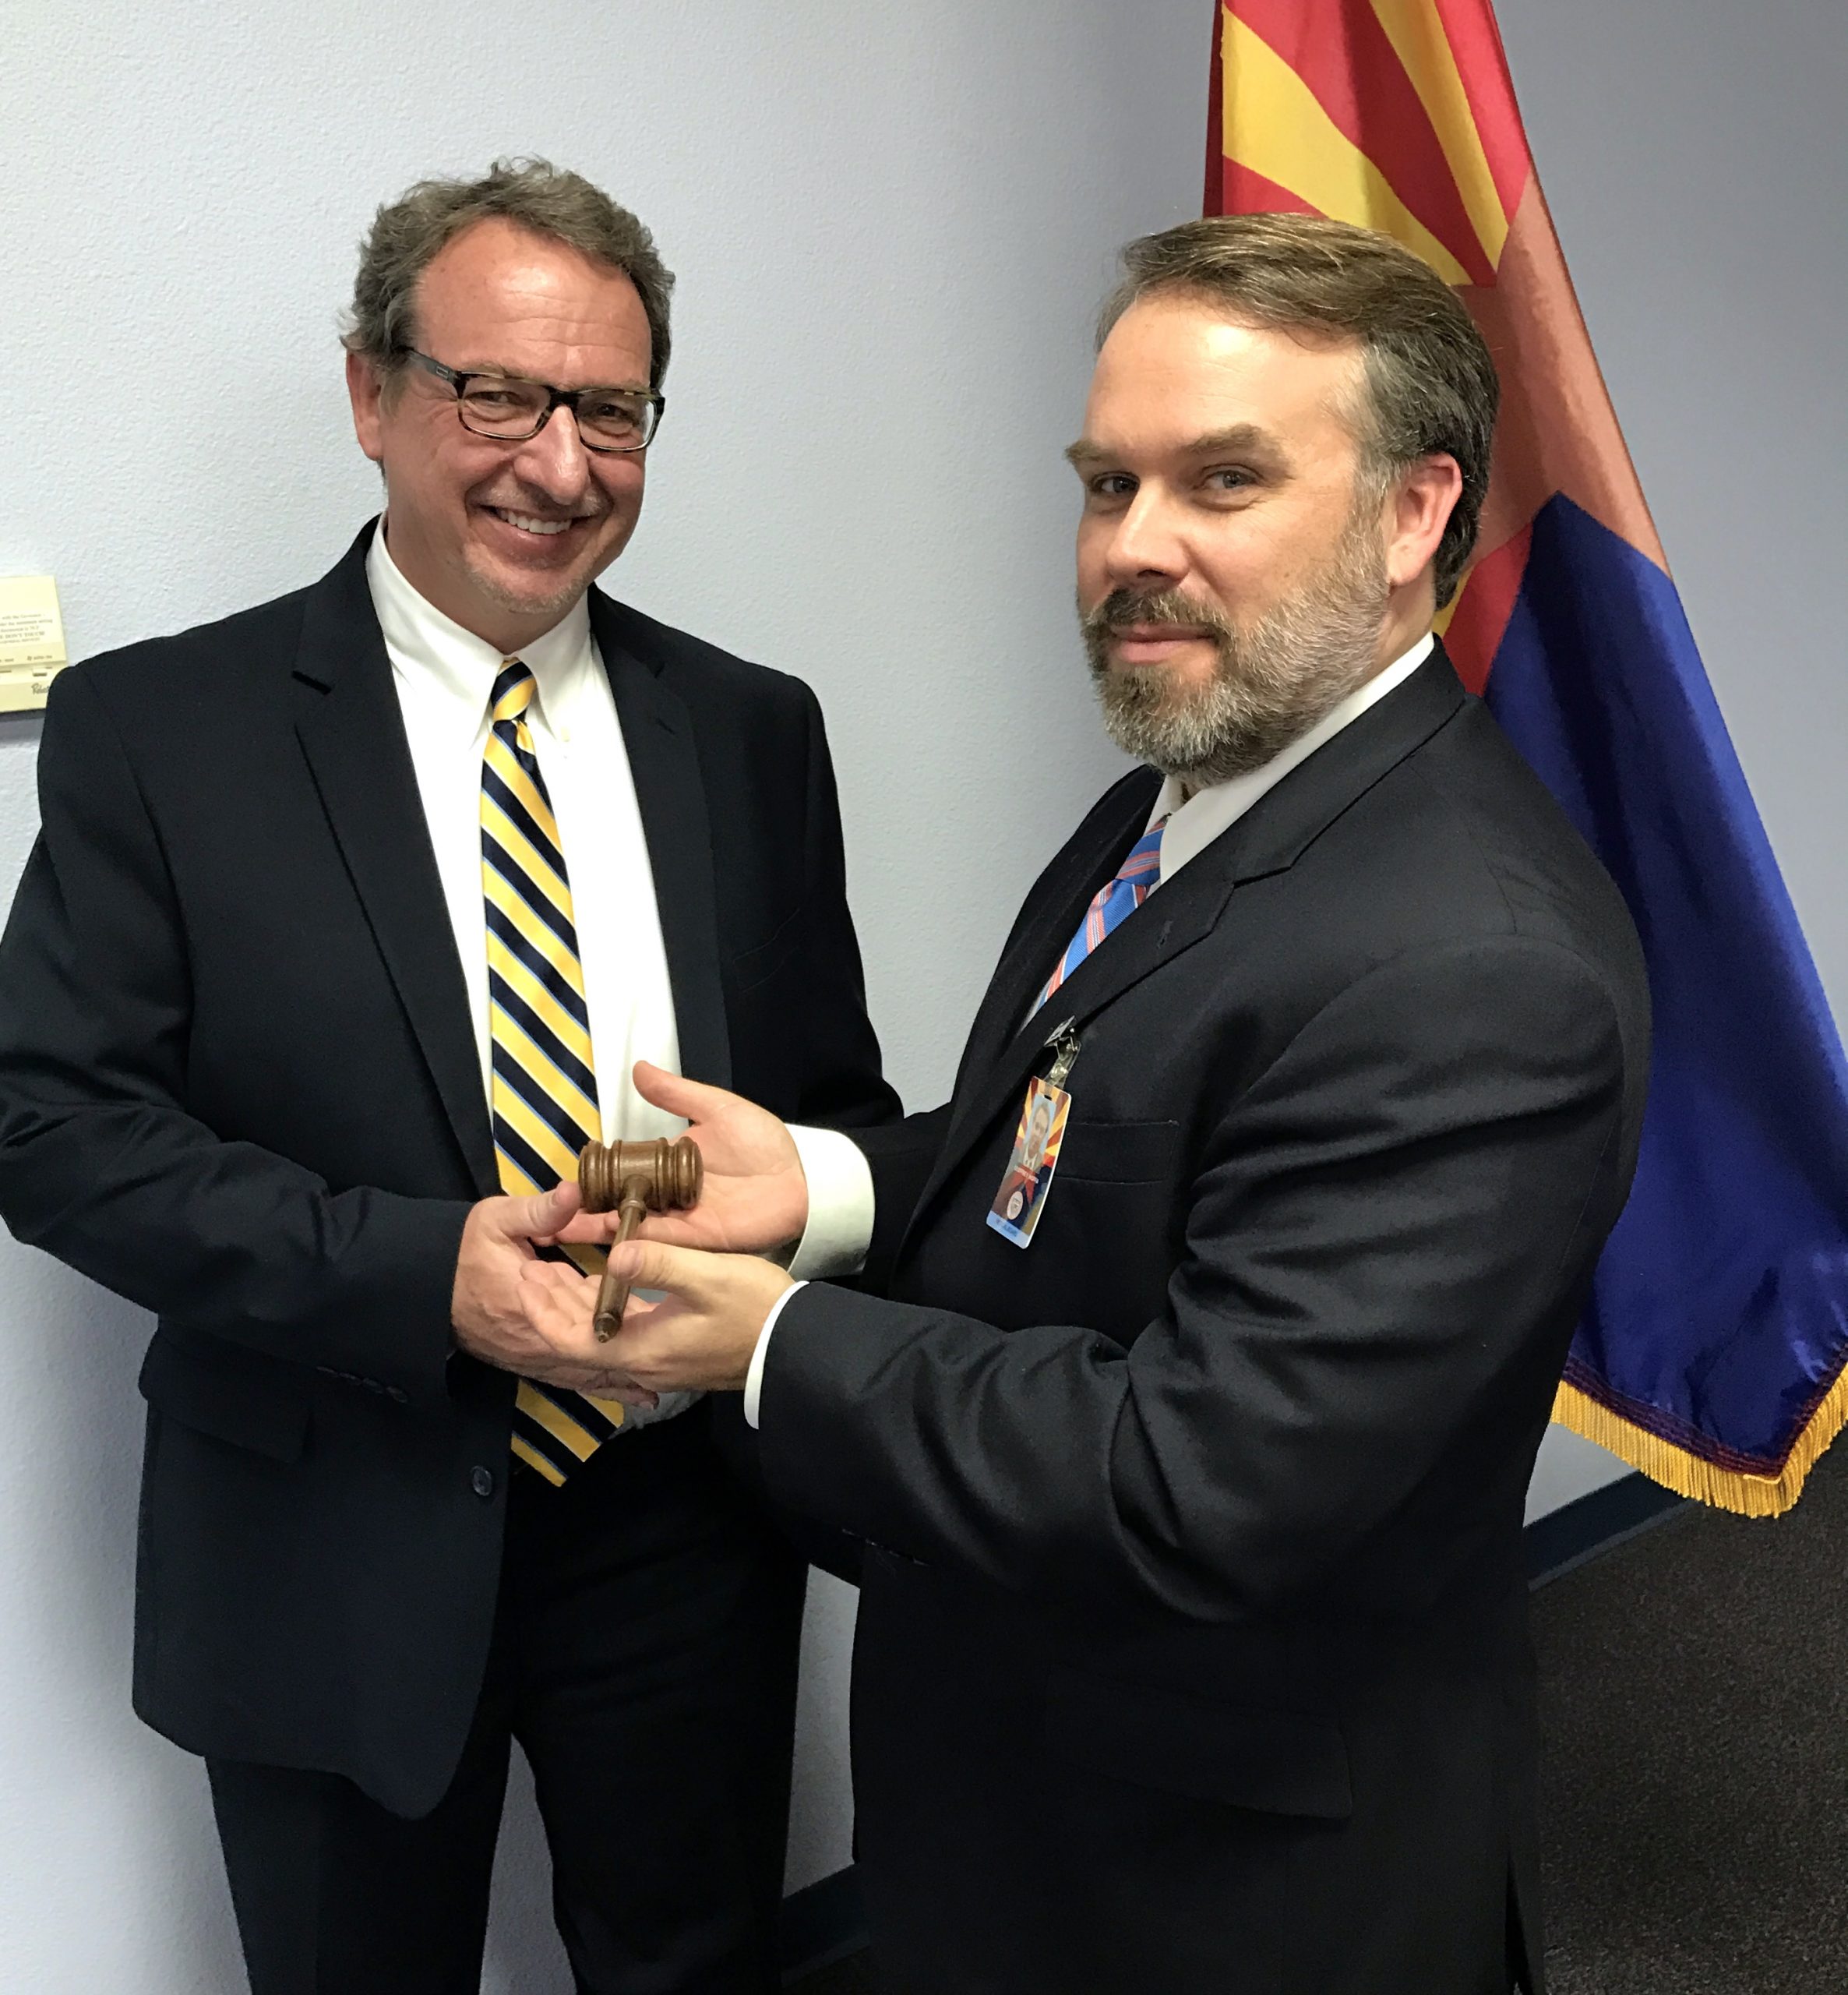 Myles Whitfield, new chair of the Arizona Regulatory Board of Physician Assistants, receives the gavel for the board from outgoing chair, Dr. Geoffrey Hoffa